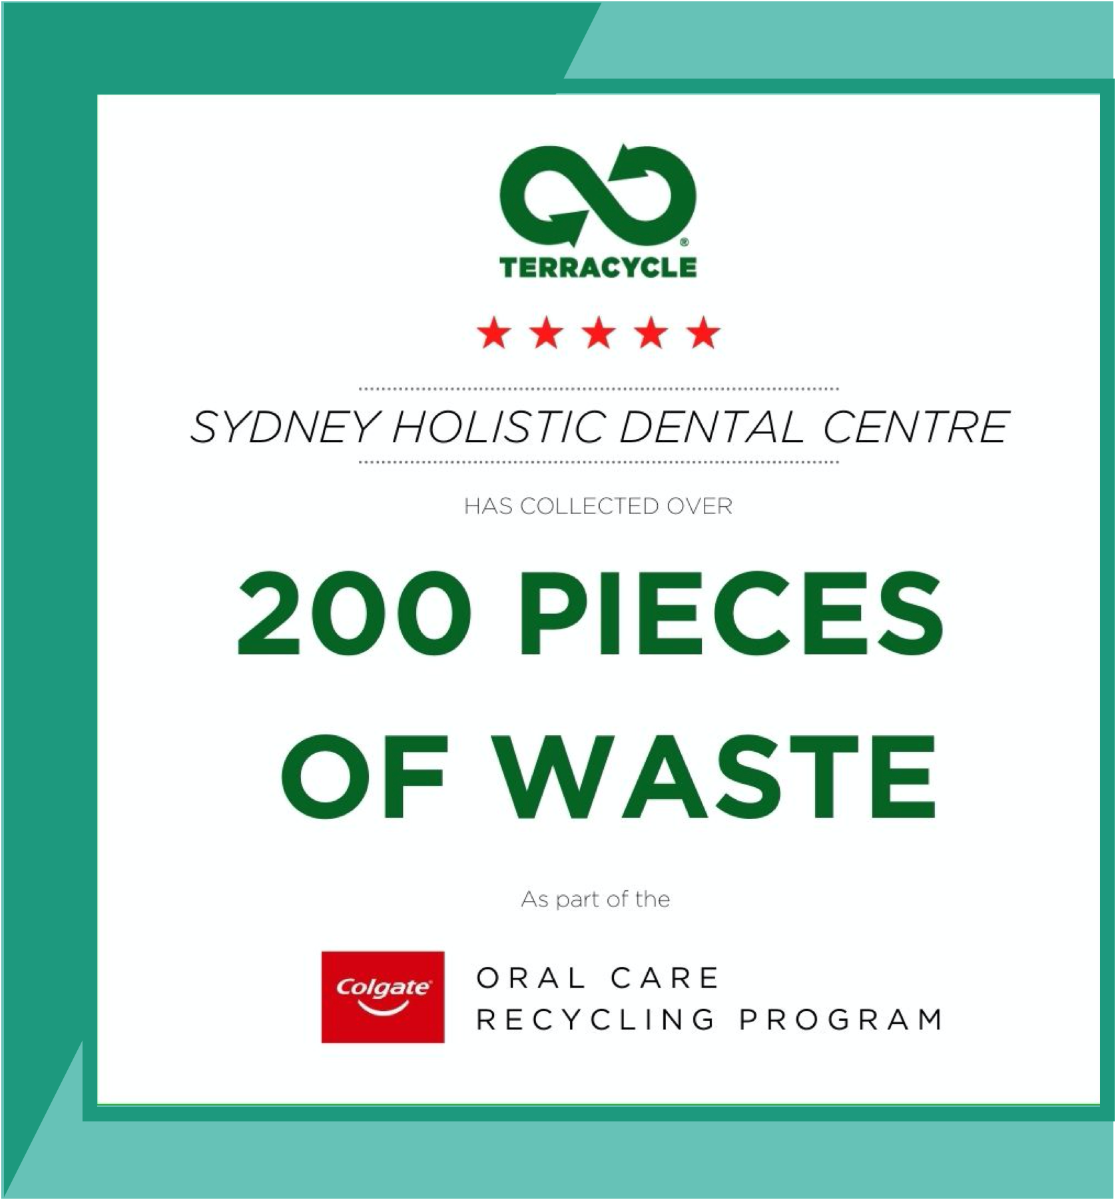 Oral Care Recycling Program at SHDC